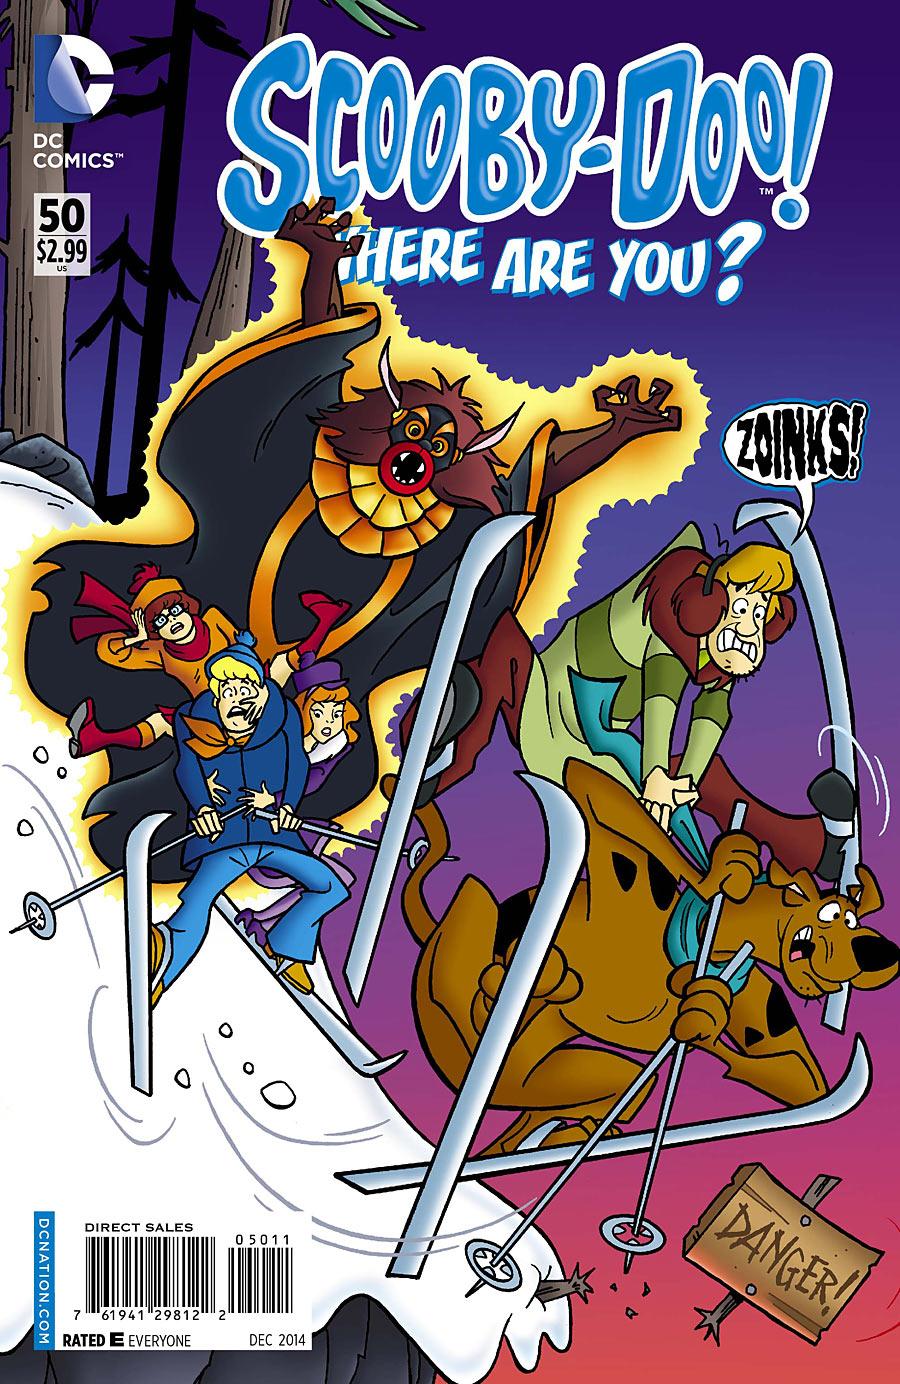 Scooby-Doo: Where Are You? Vol. 1 #50